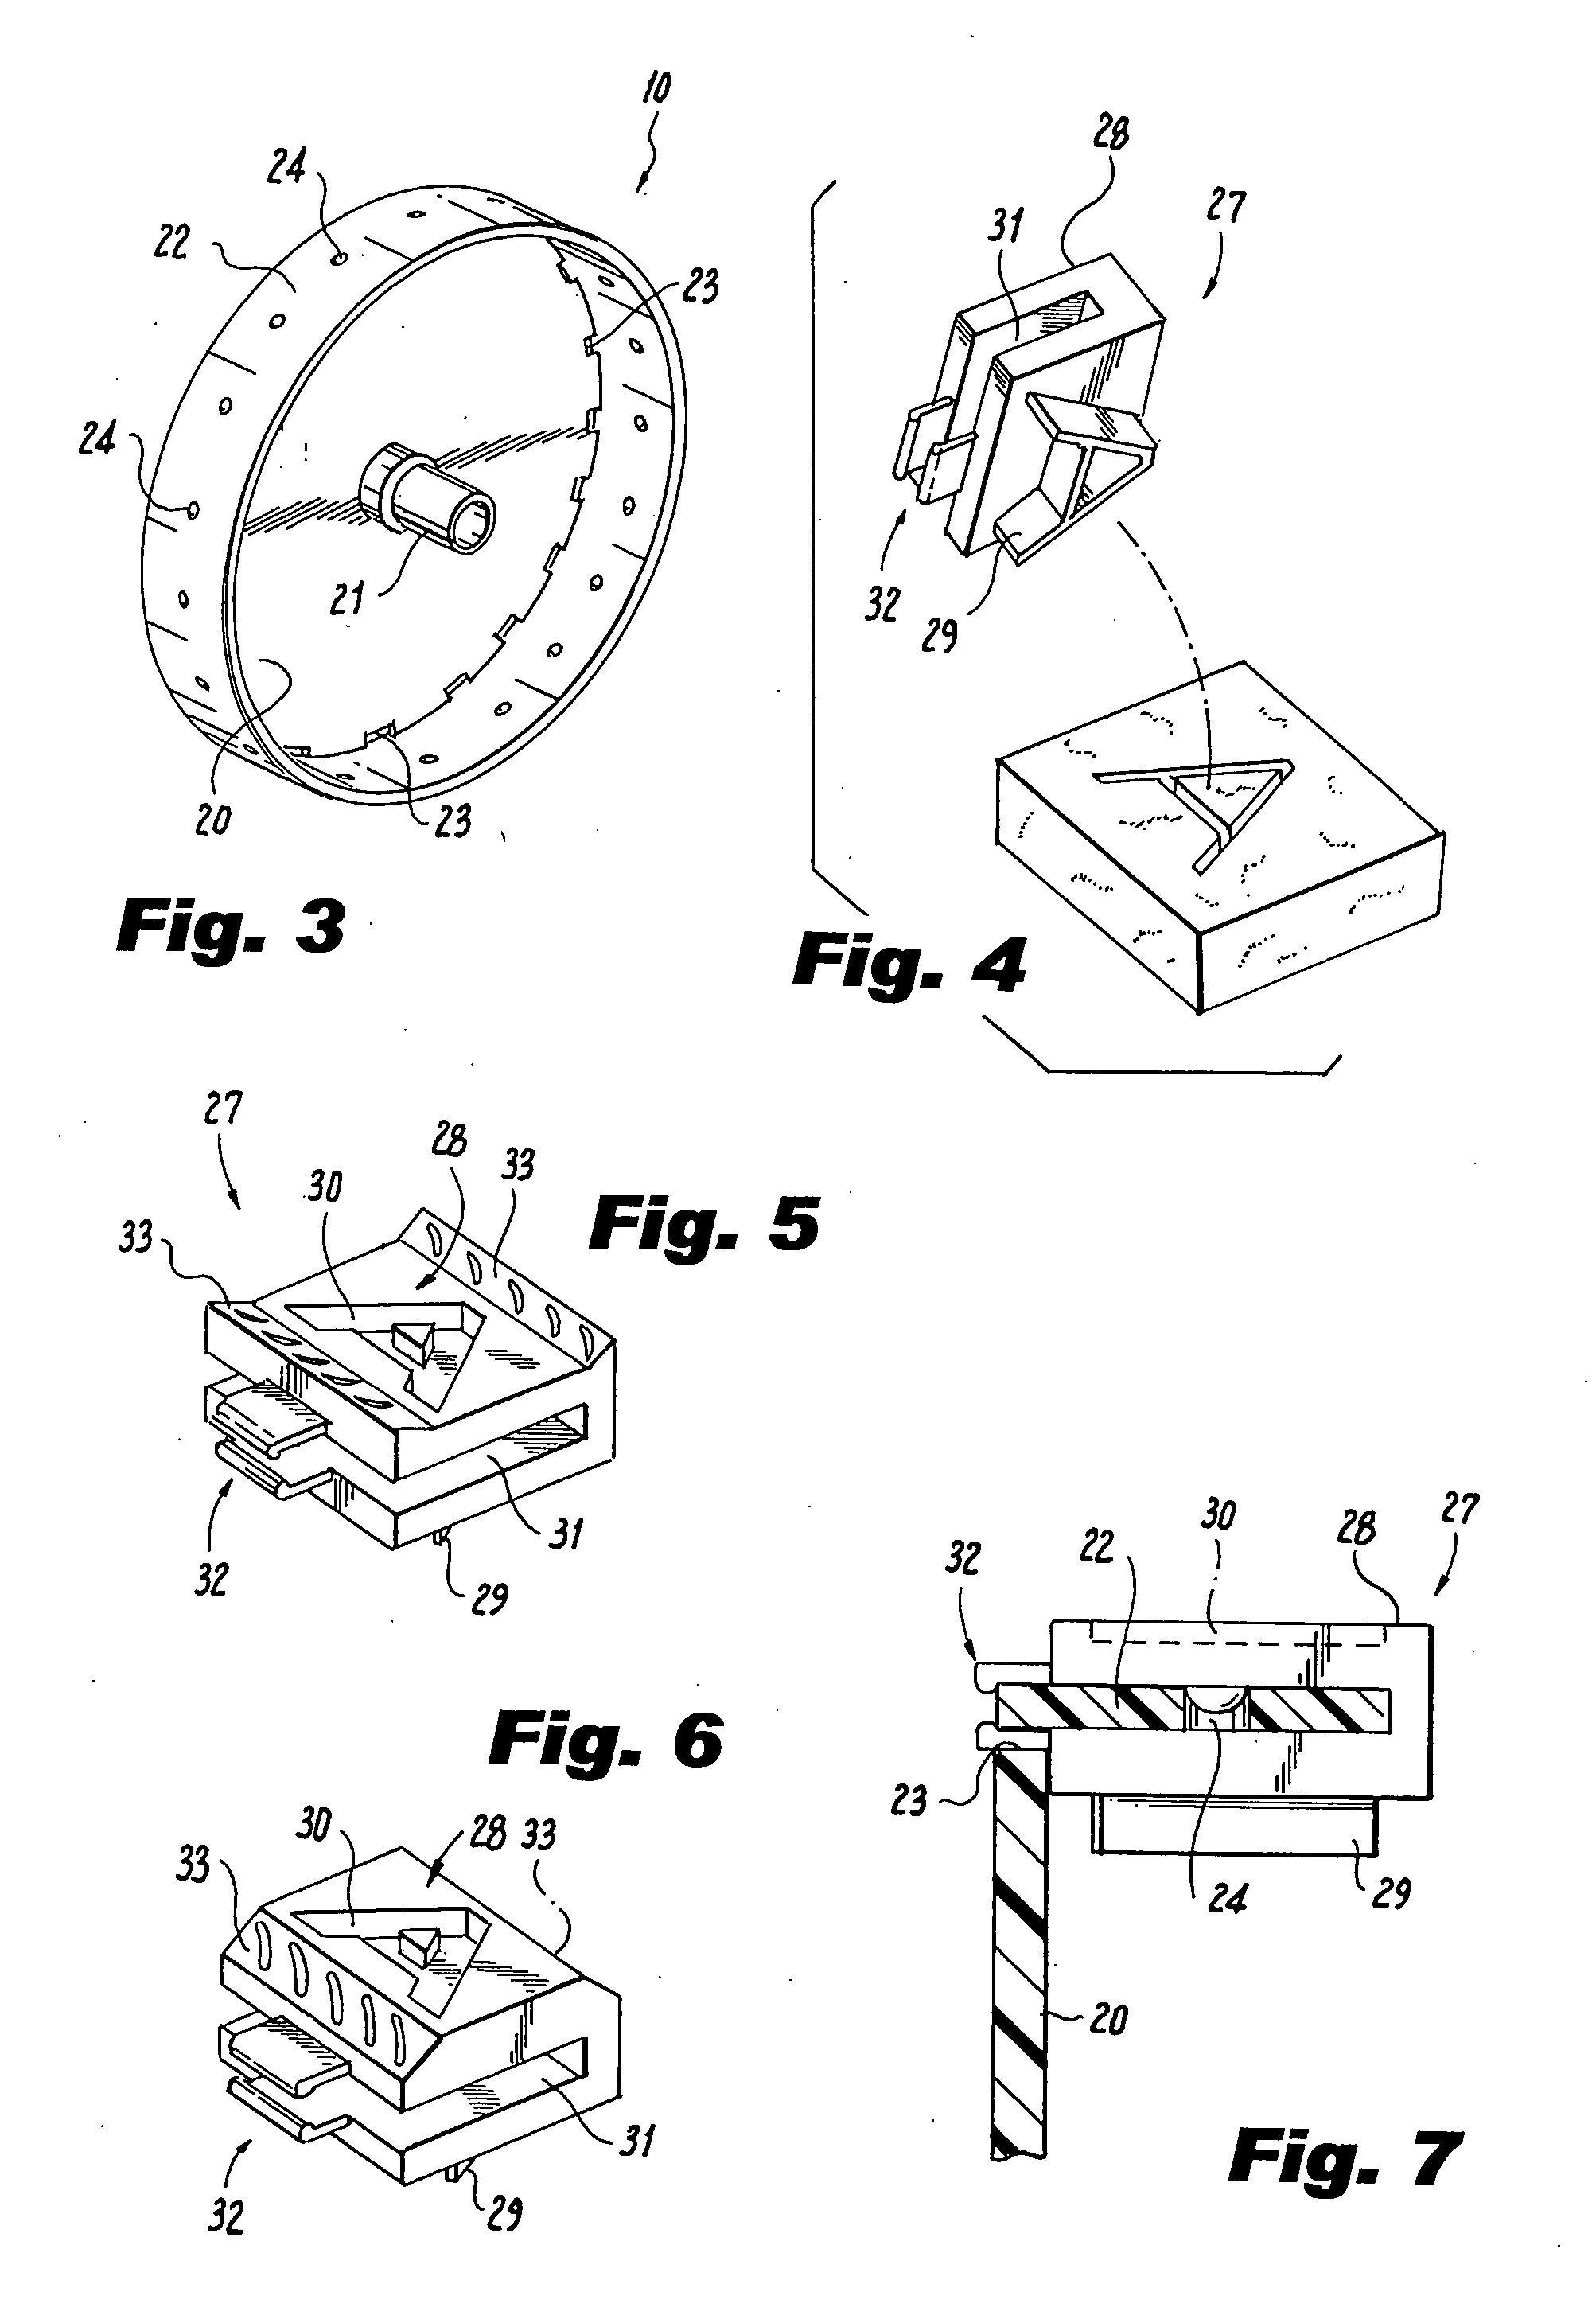 Food embossing and impressing device